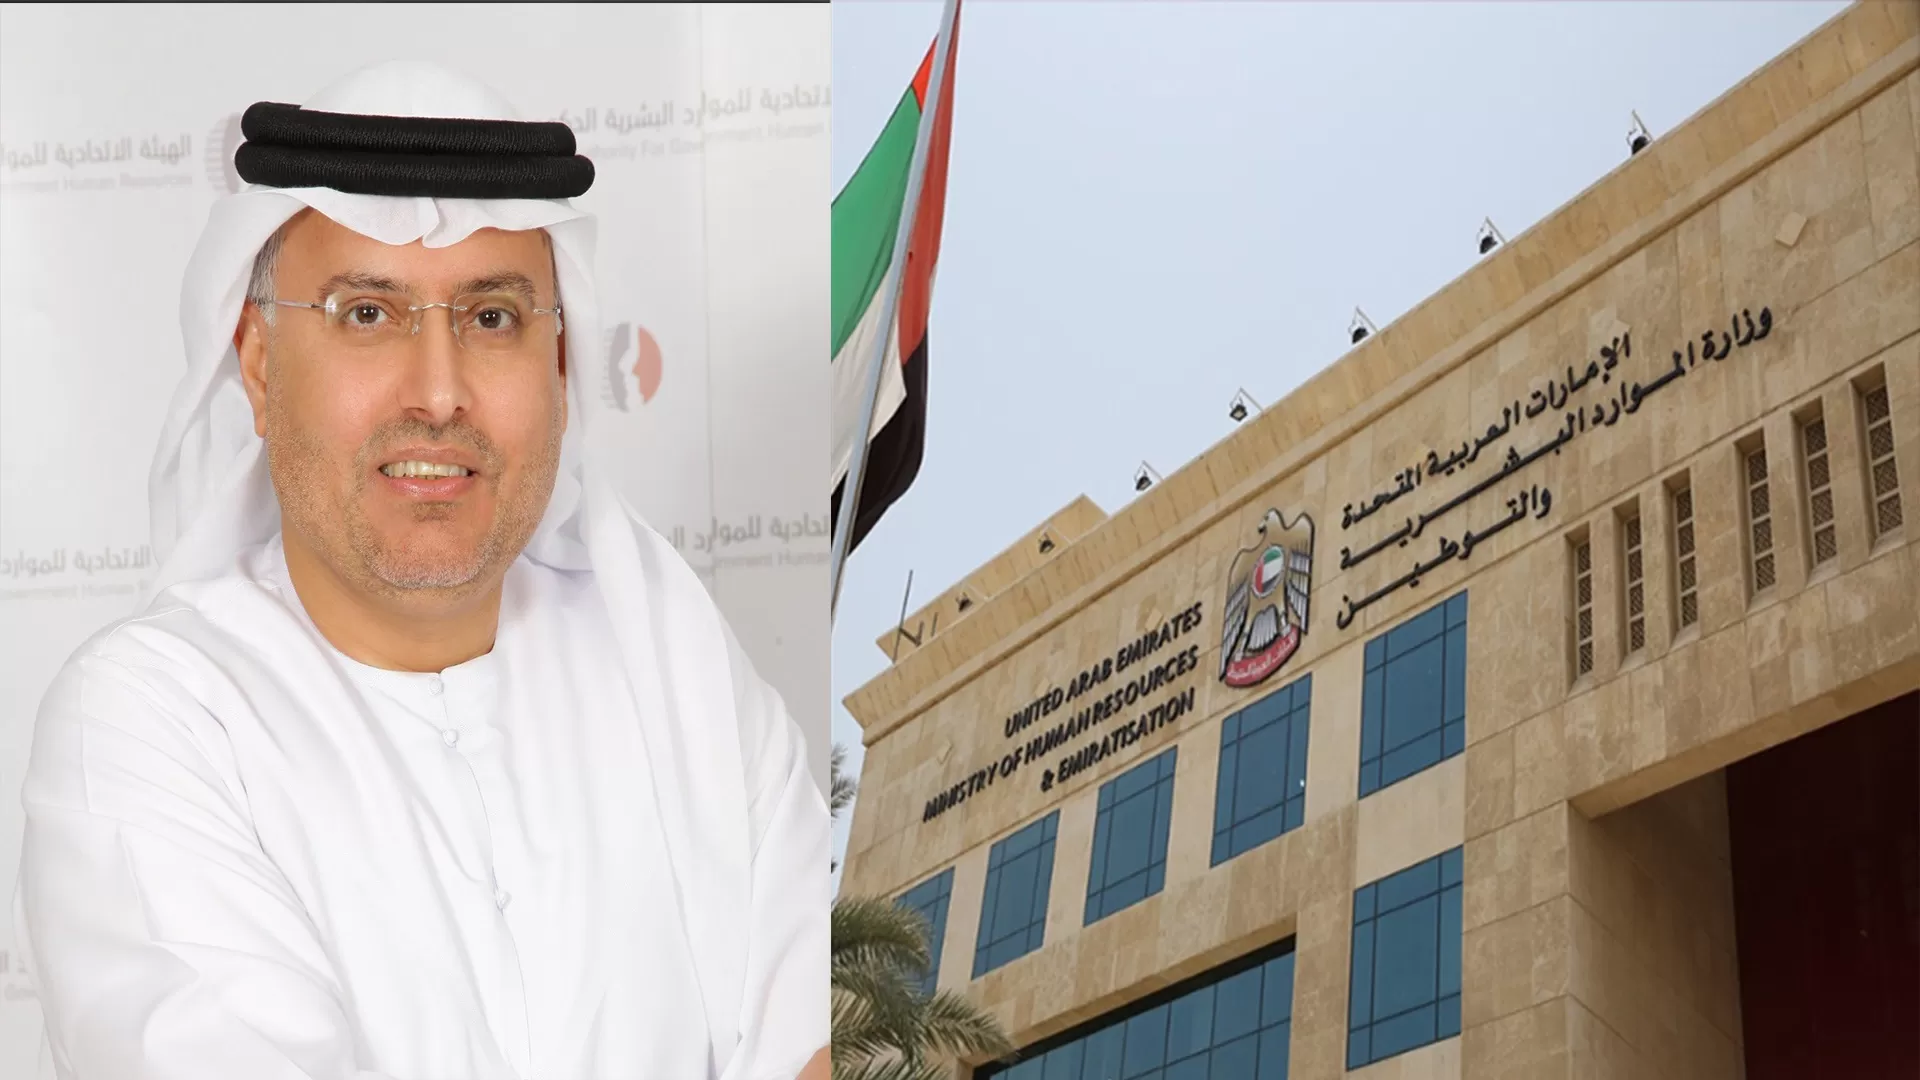 The Ministry of Human Resources in the United Arab Emirates